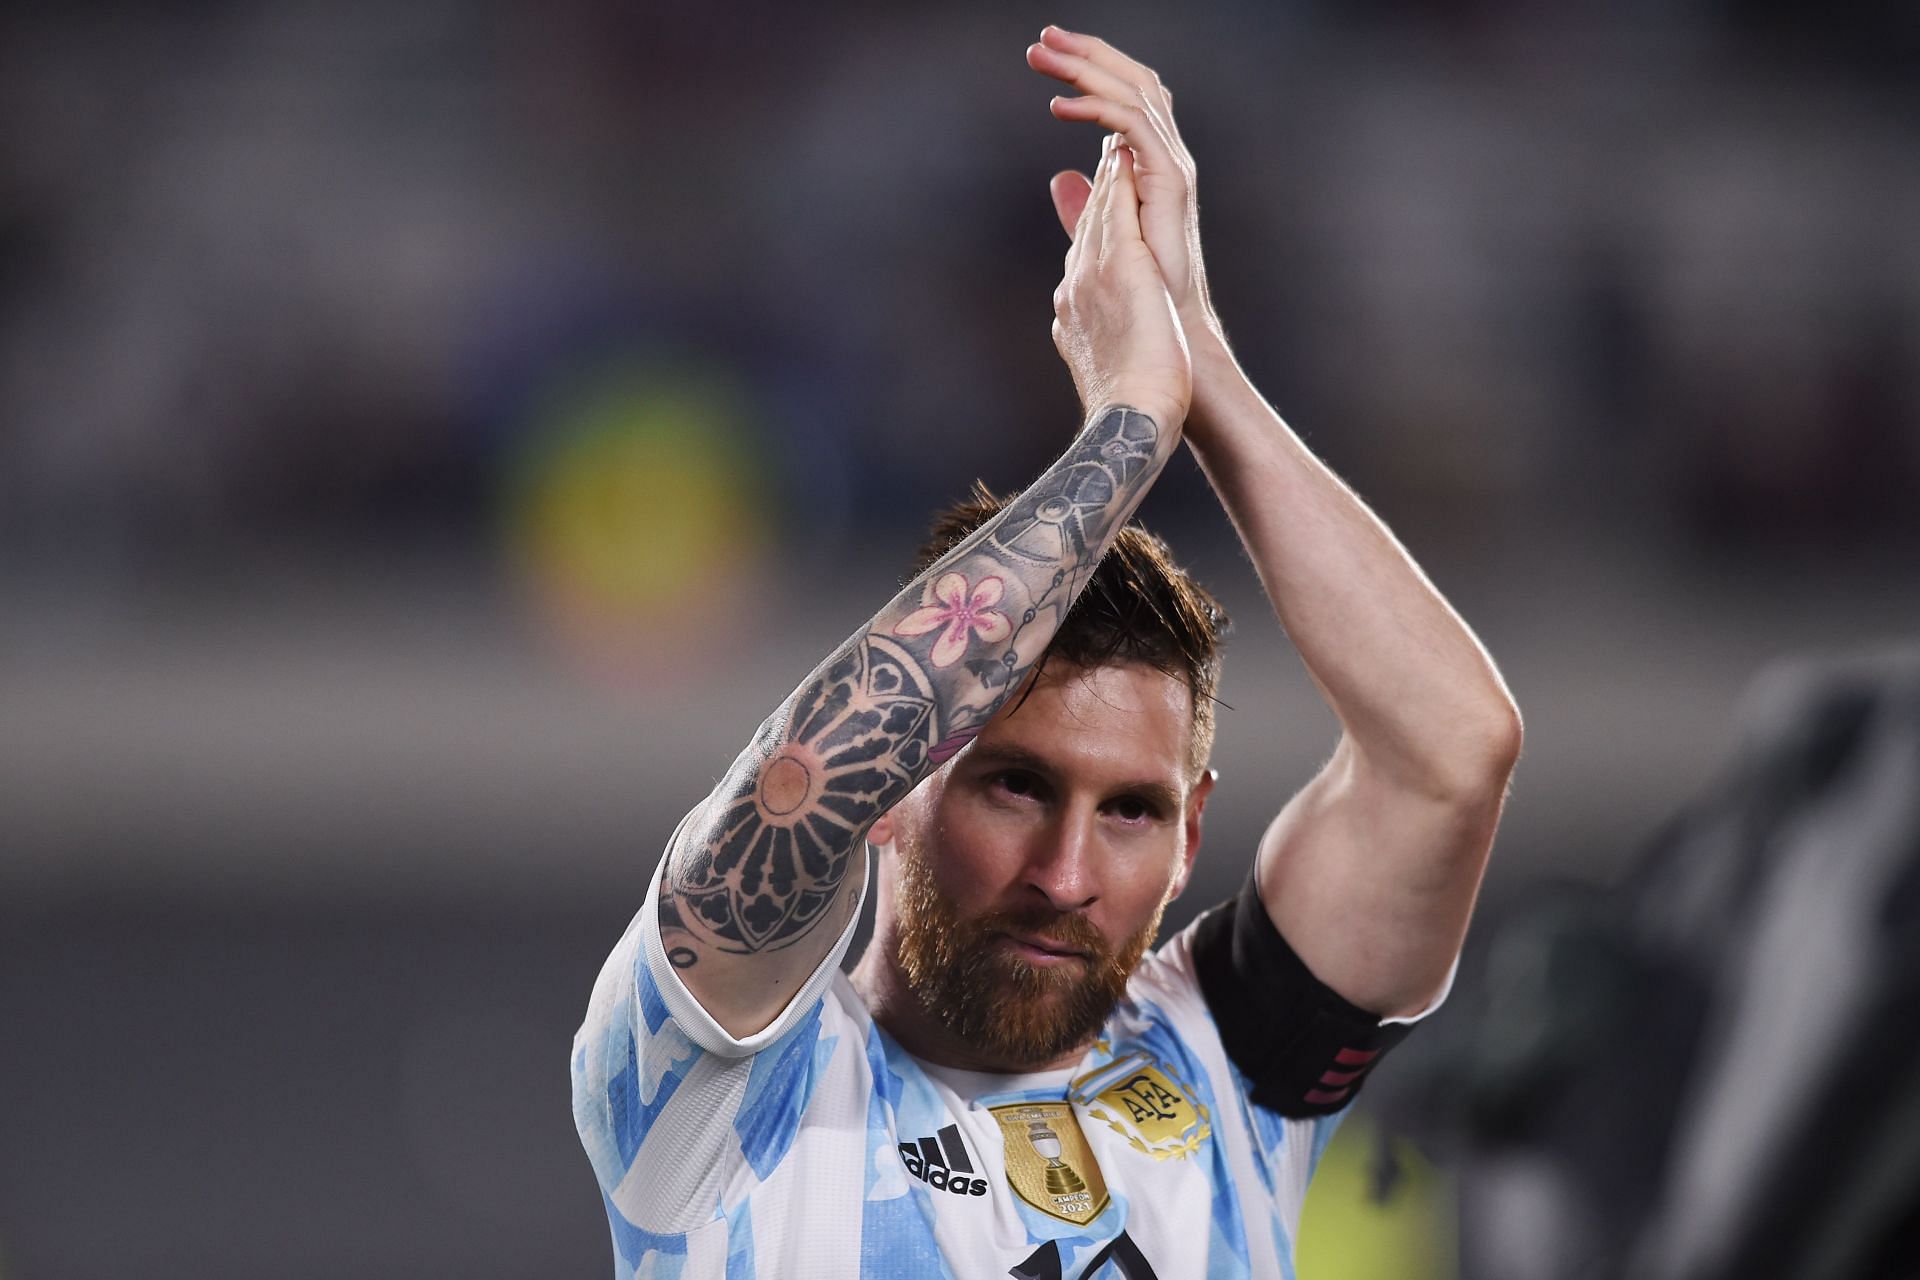 Lionel Messi is enjoying the brightest period of his Argentina career right now